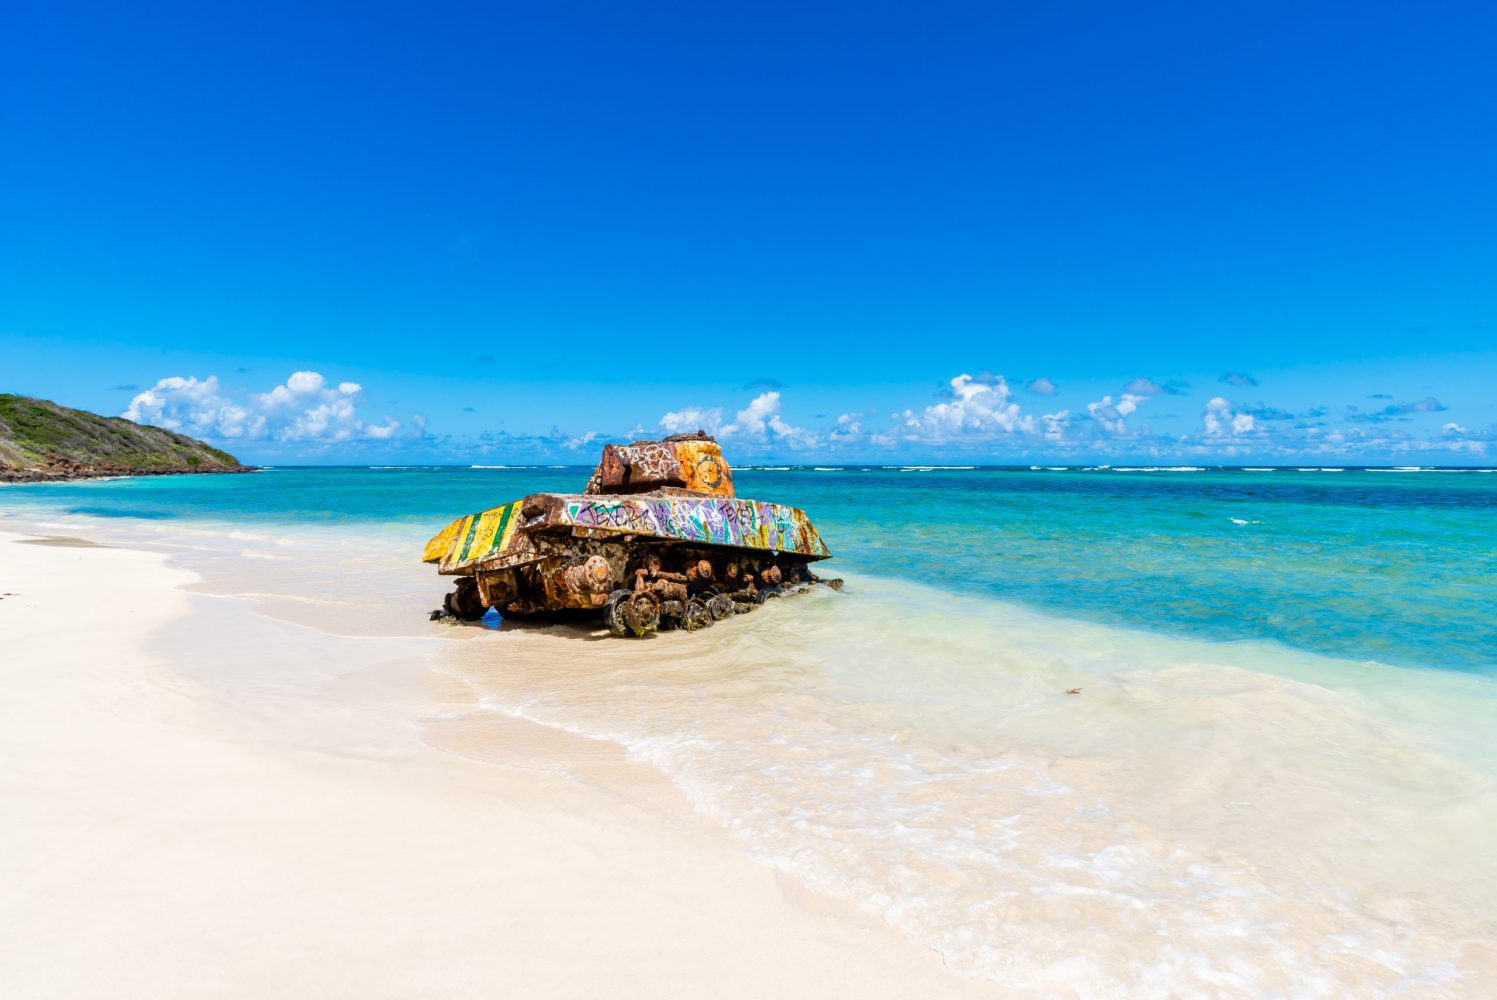 a boat sitting on top of a sandy beach next to the ocean